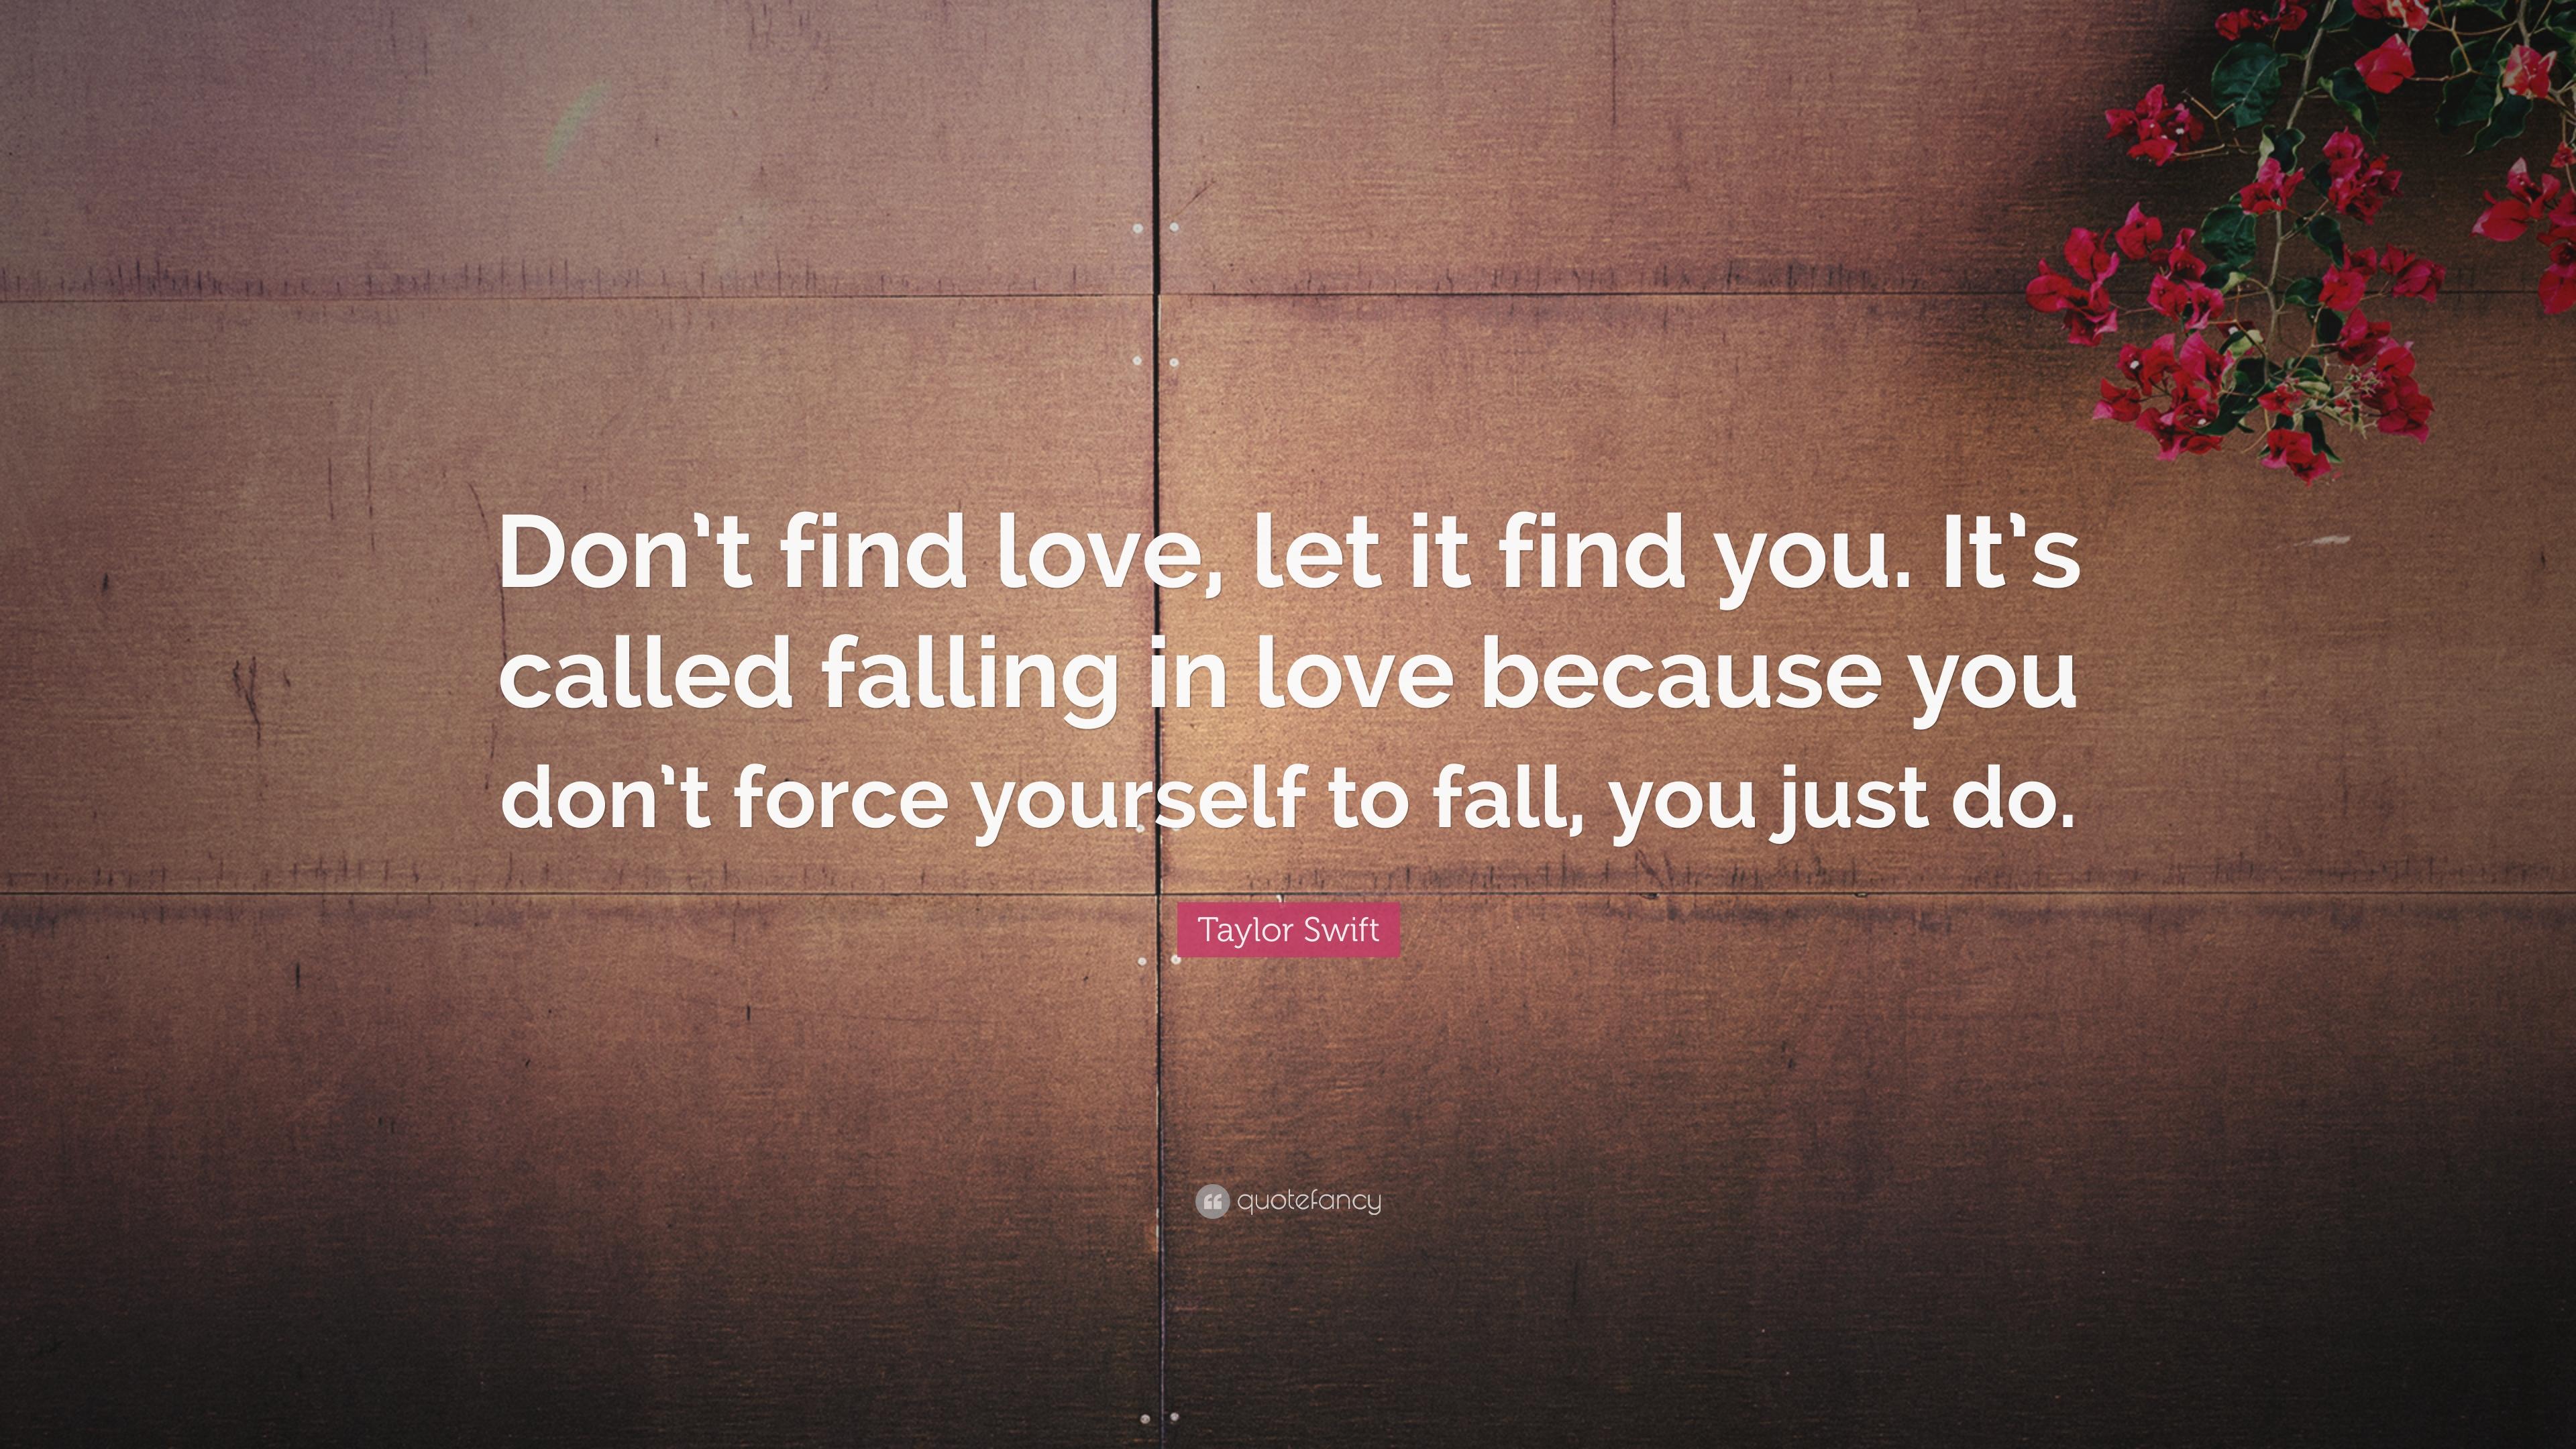 Taylor Swift Quote: “Don't find love, let it find you. It's